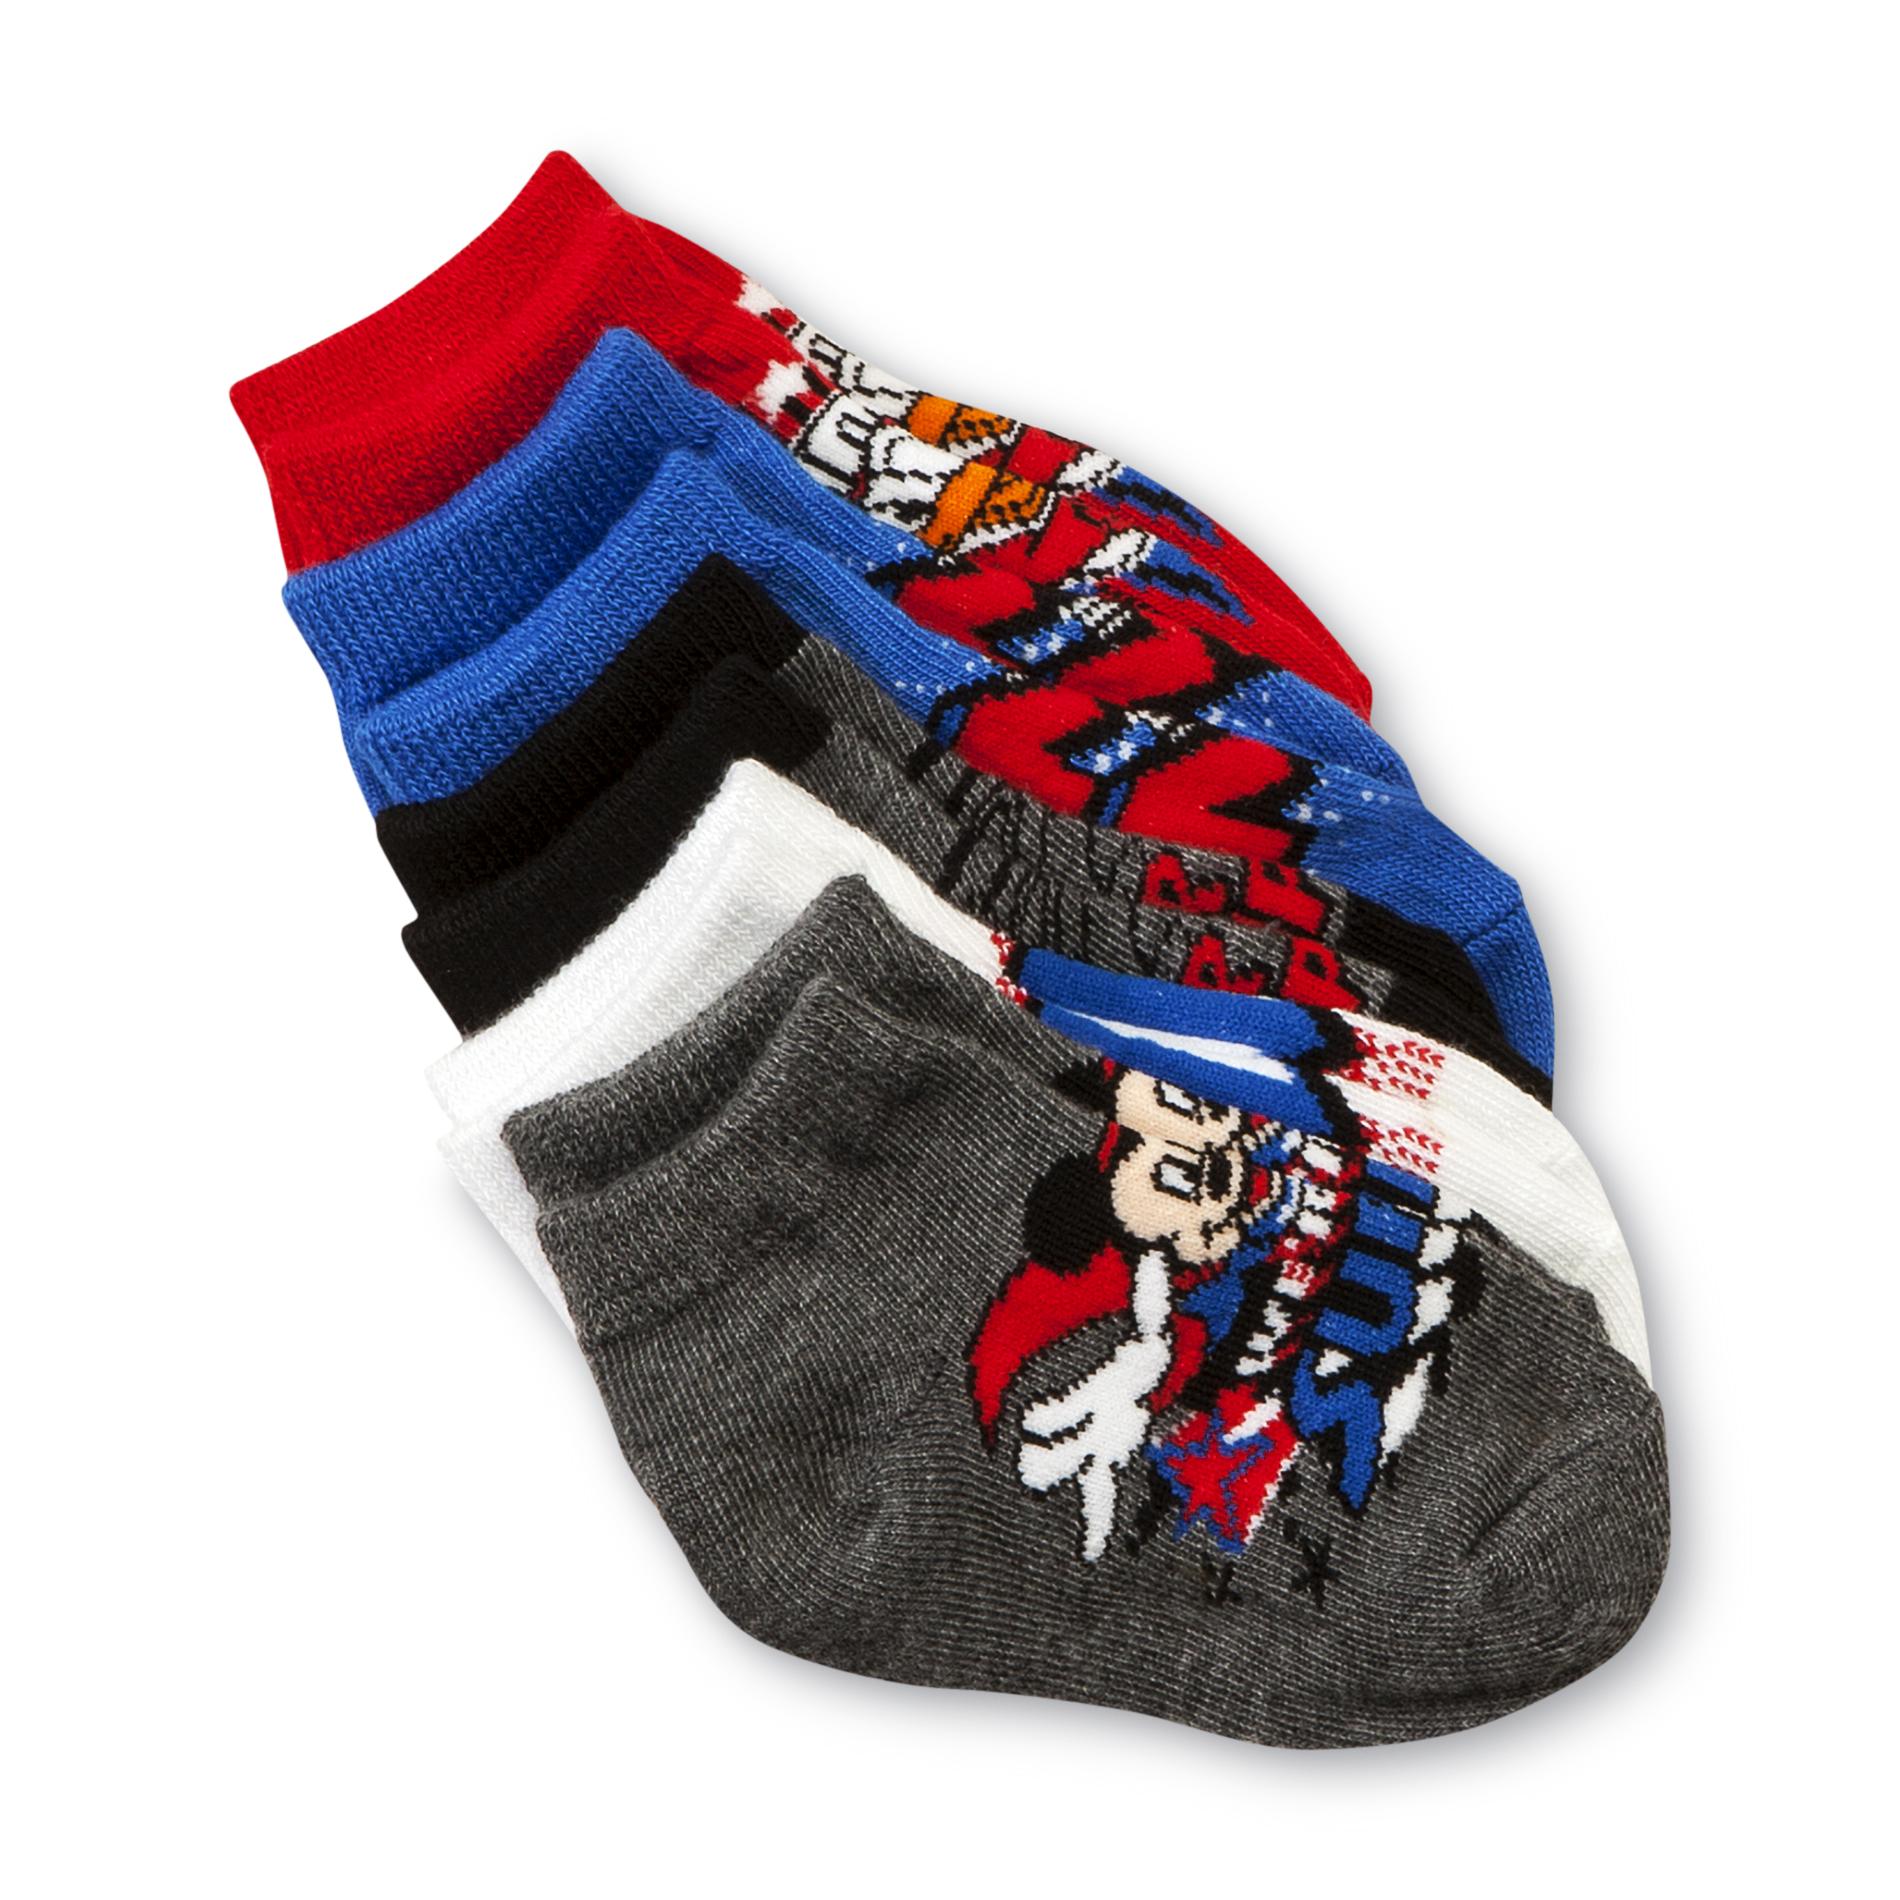 Disney Infant Boy's 5-Pairs Ankle Socks - Mickey Mouse